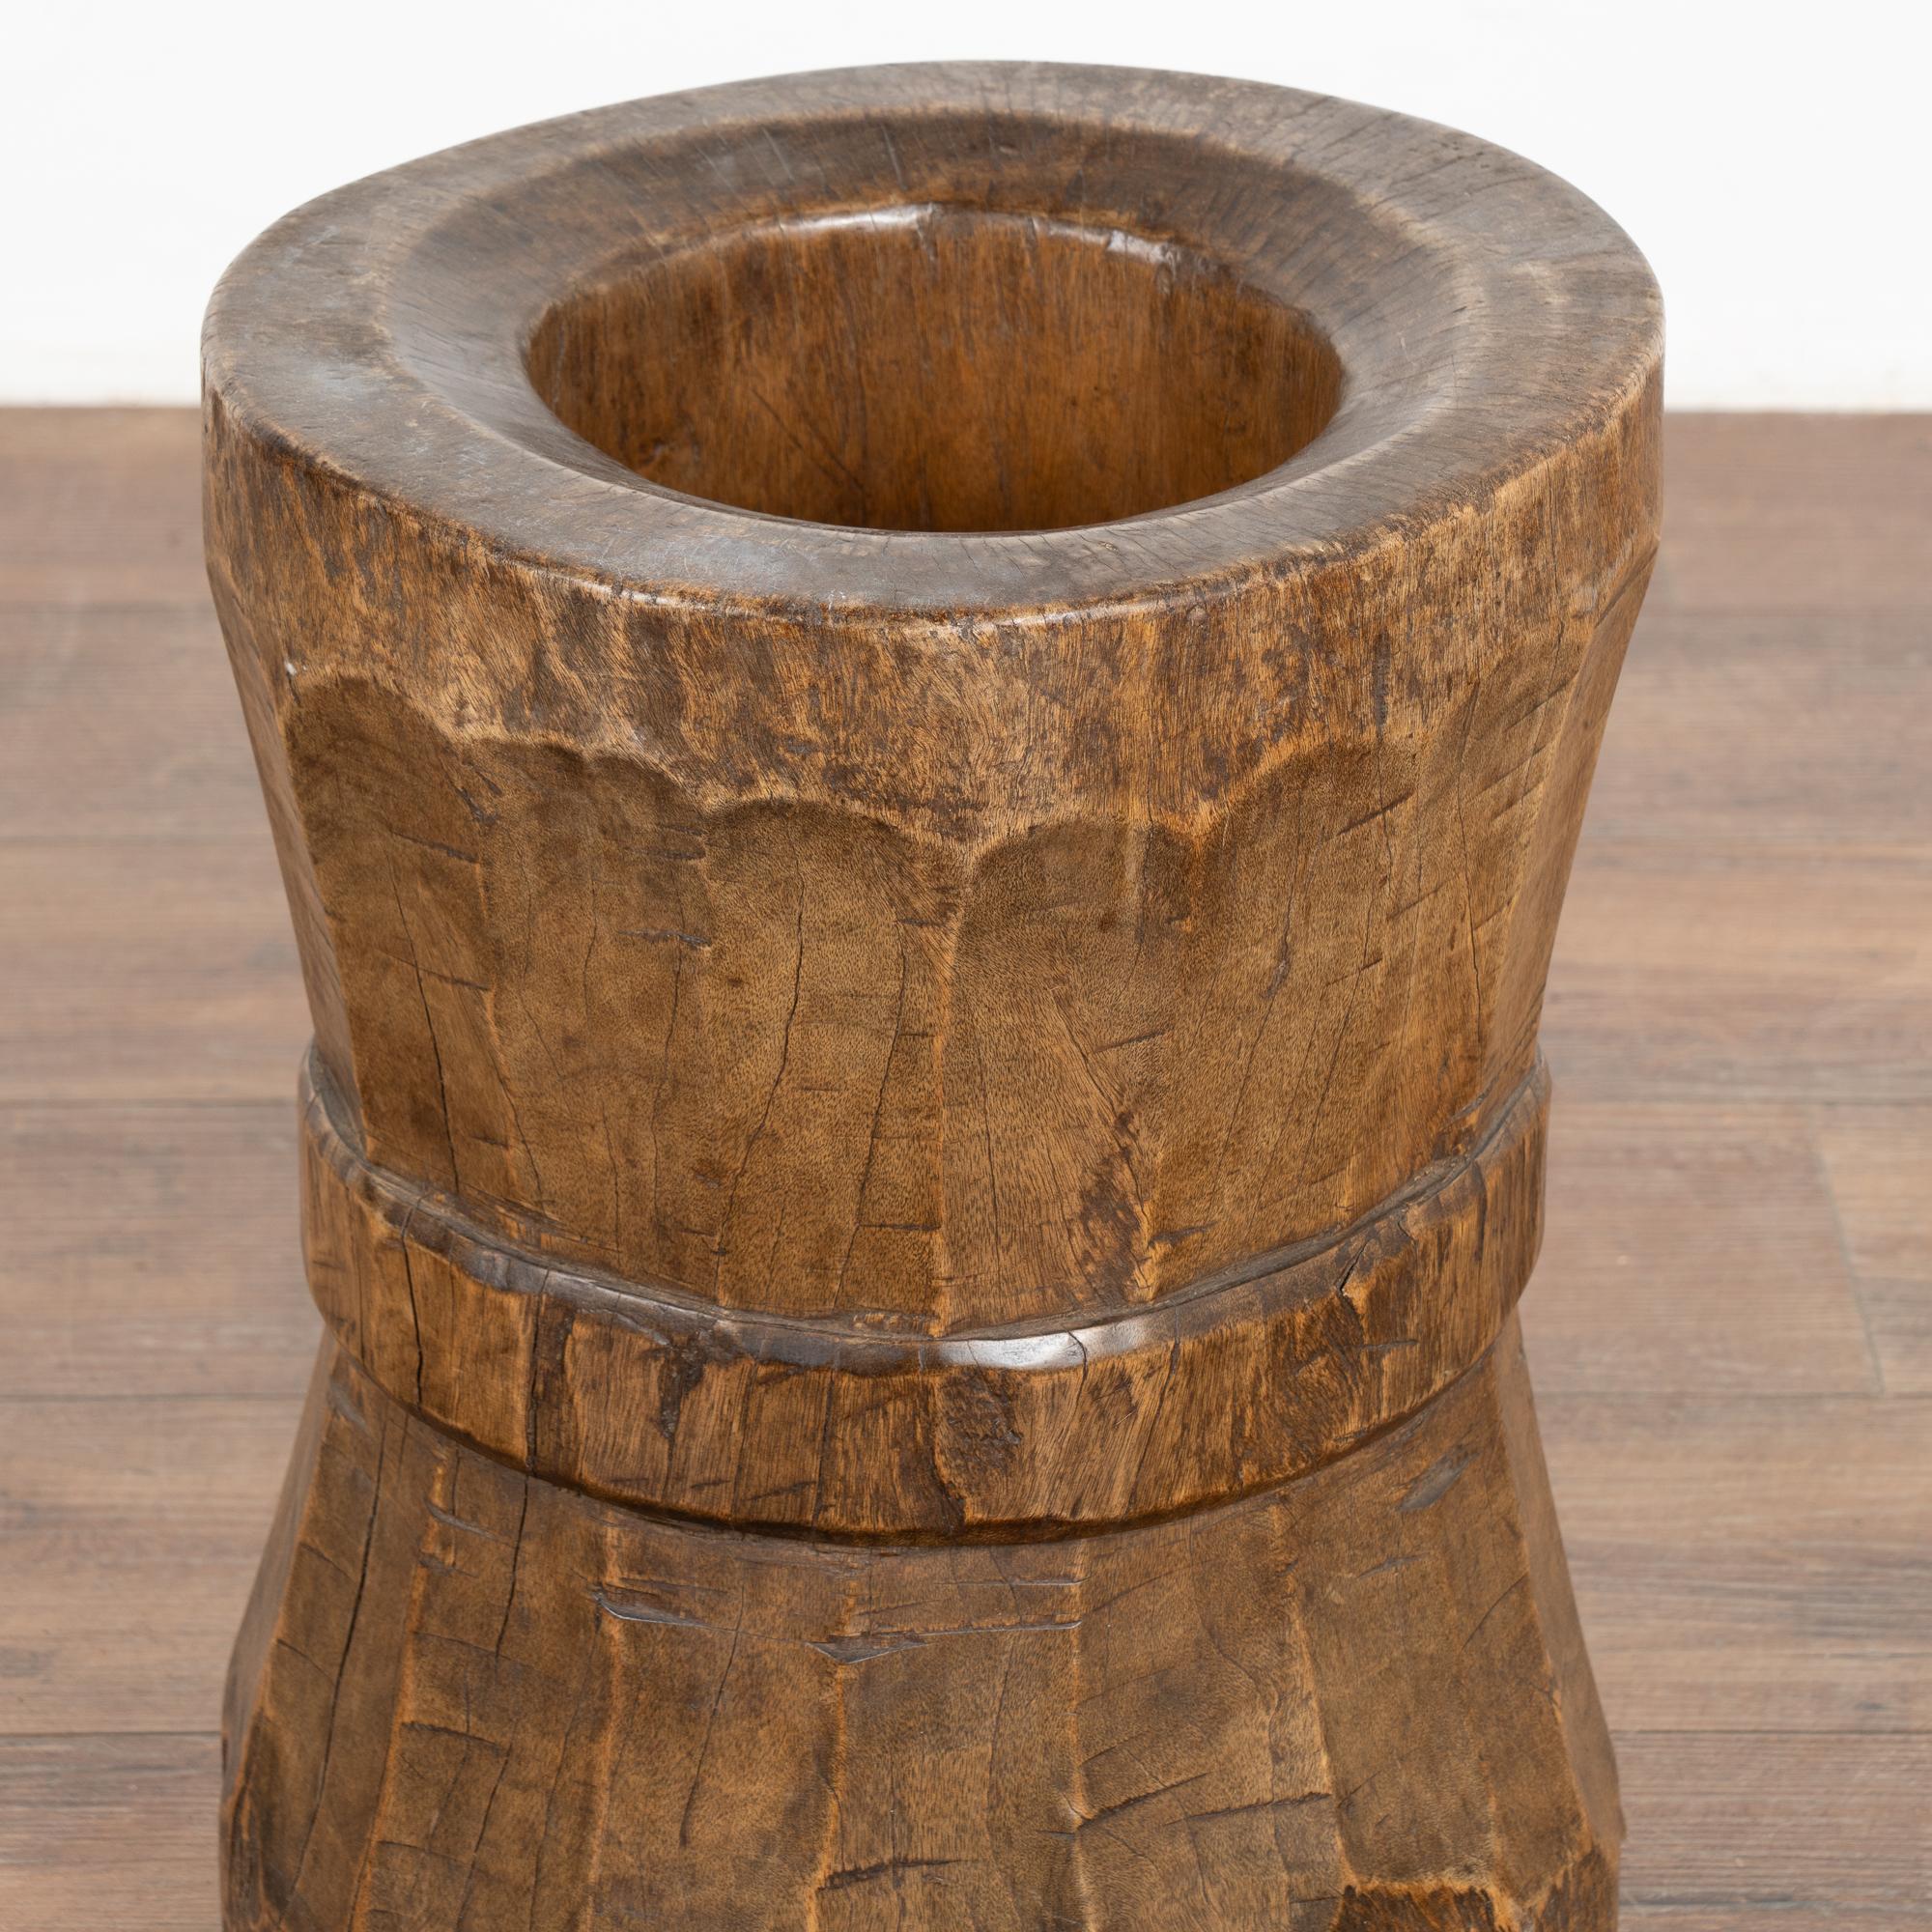 19th Century Wood Sculpture Container from Old Water Mill Gear, China 1800-40 For Sale